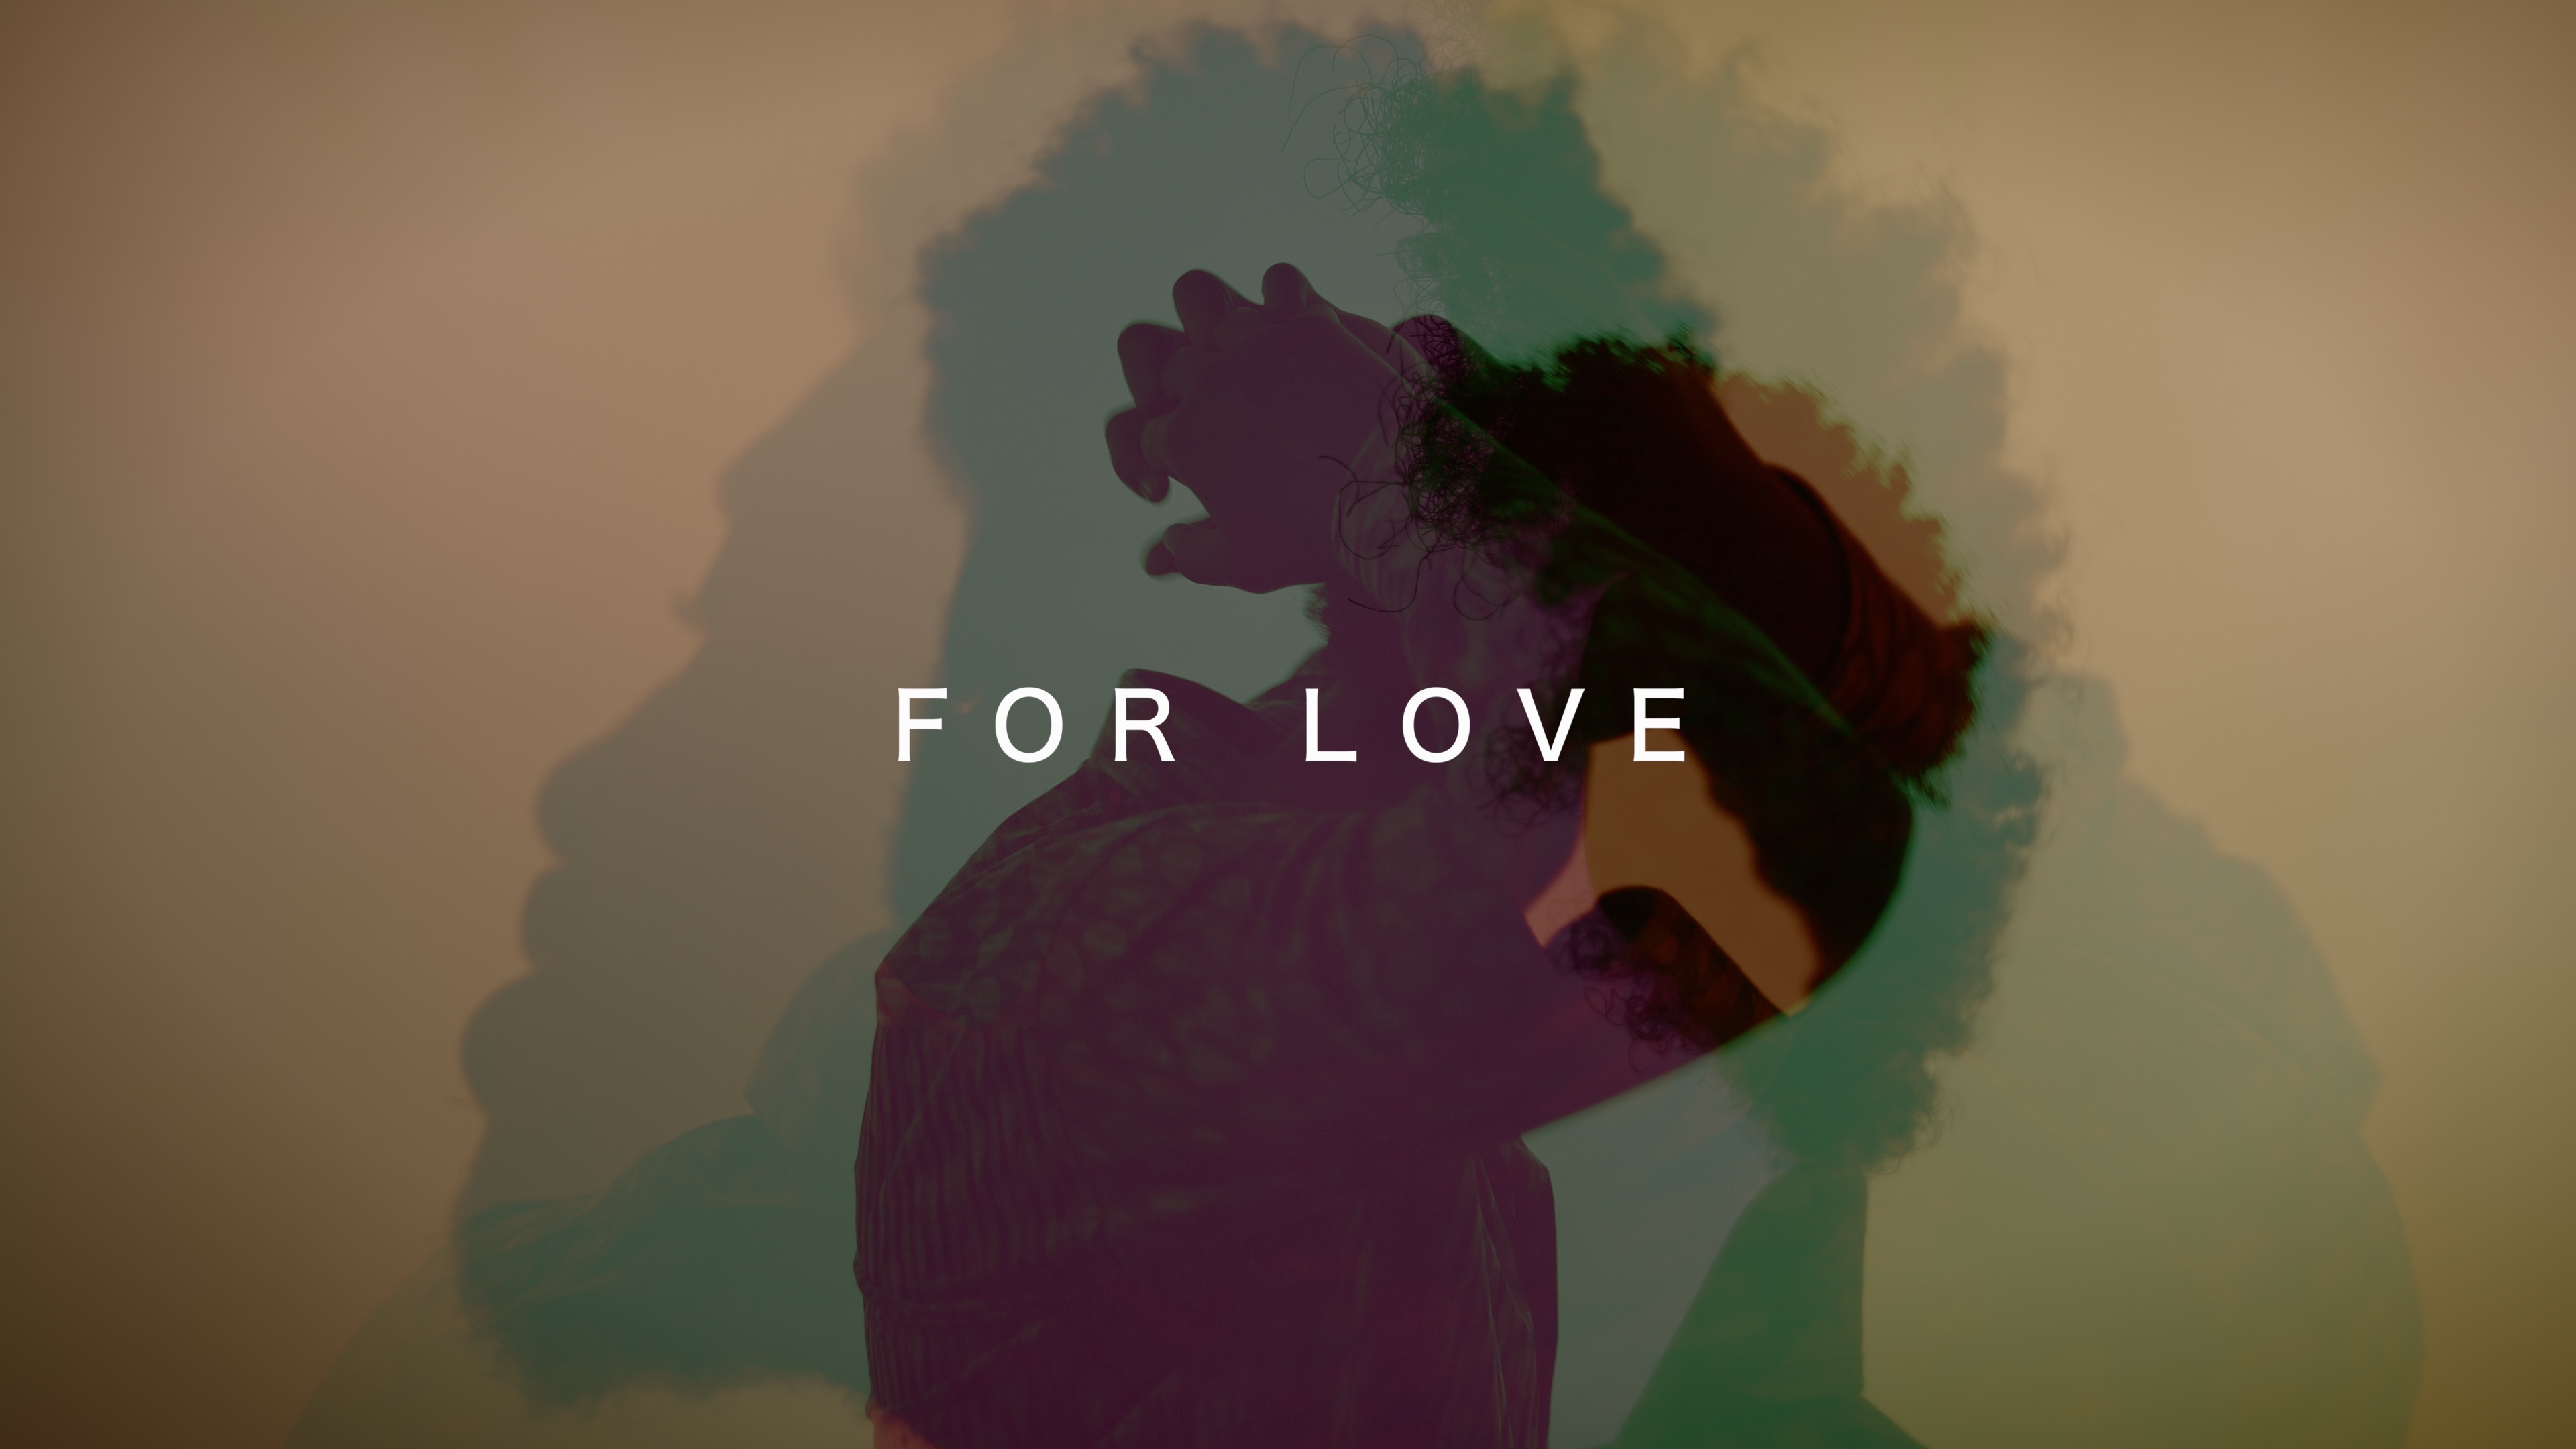 FOR LOVE, A Music Visual